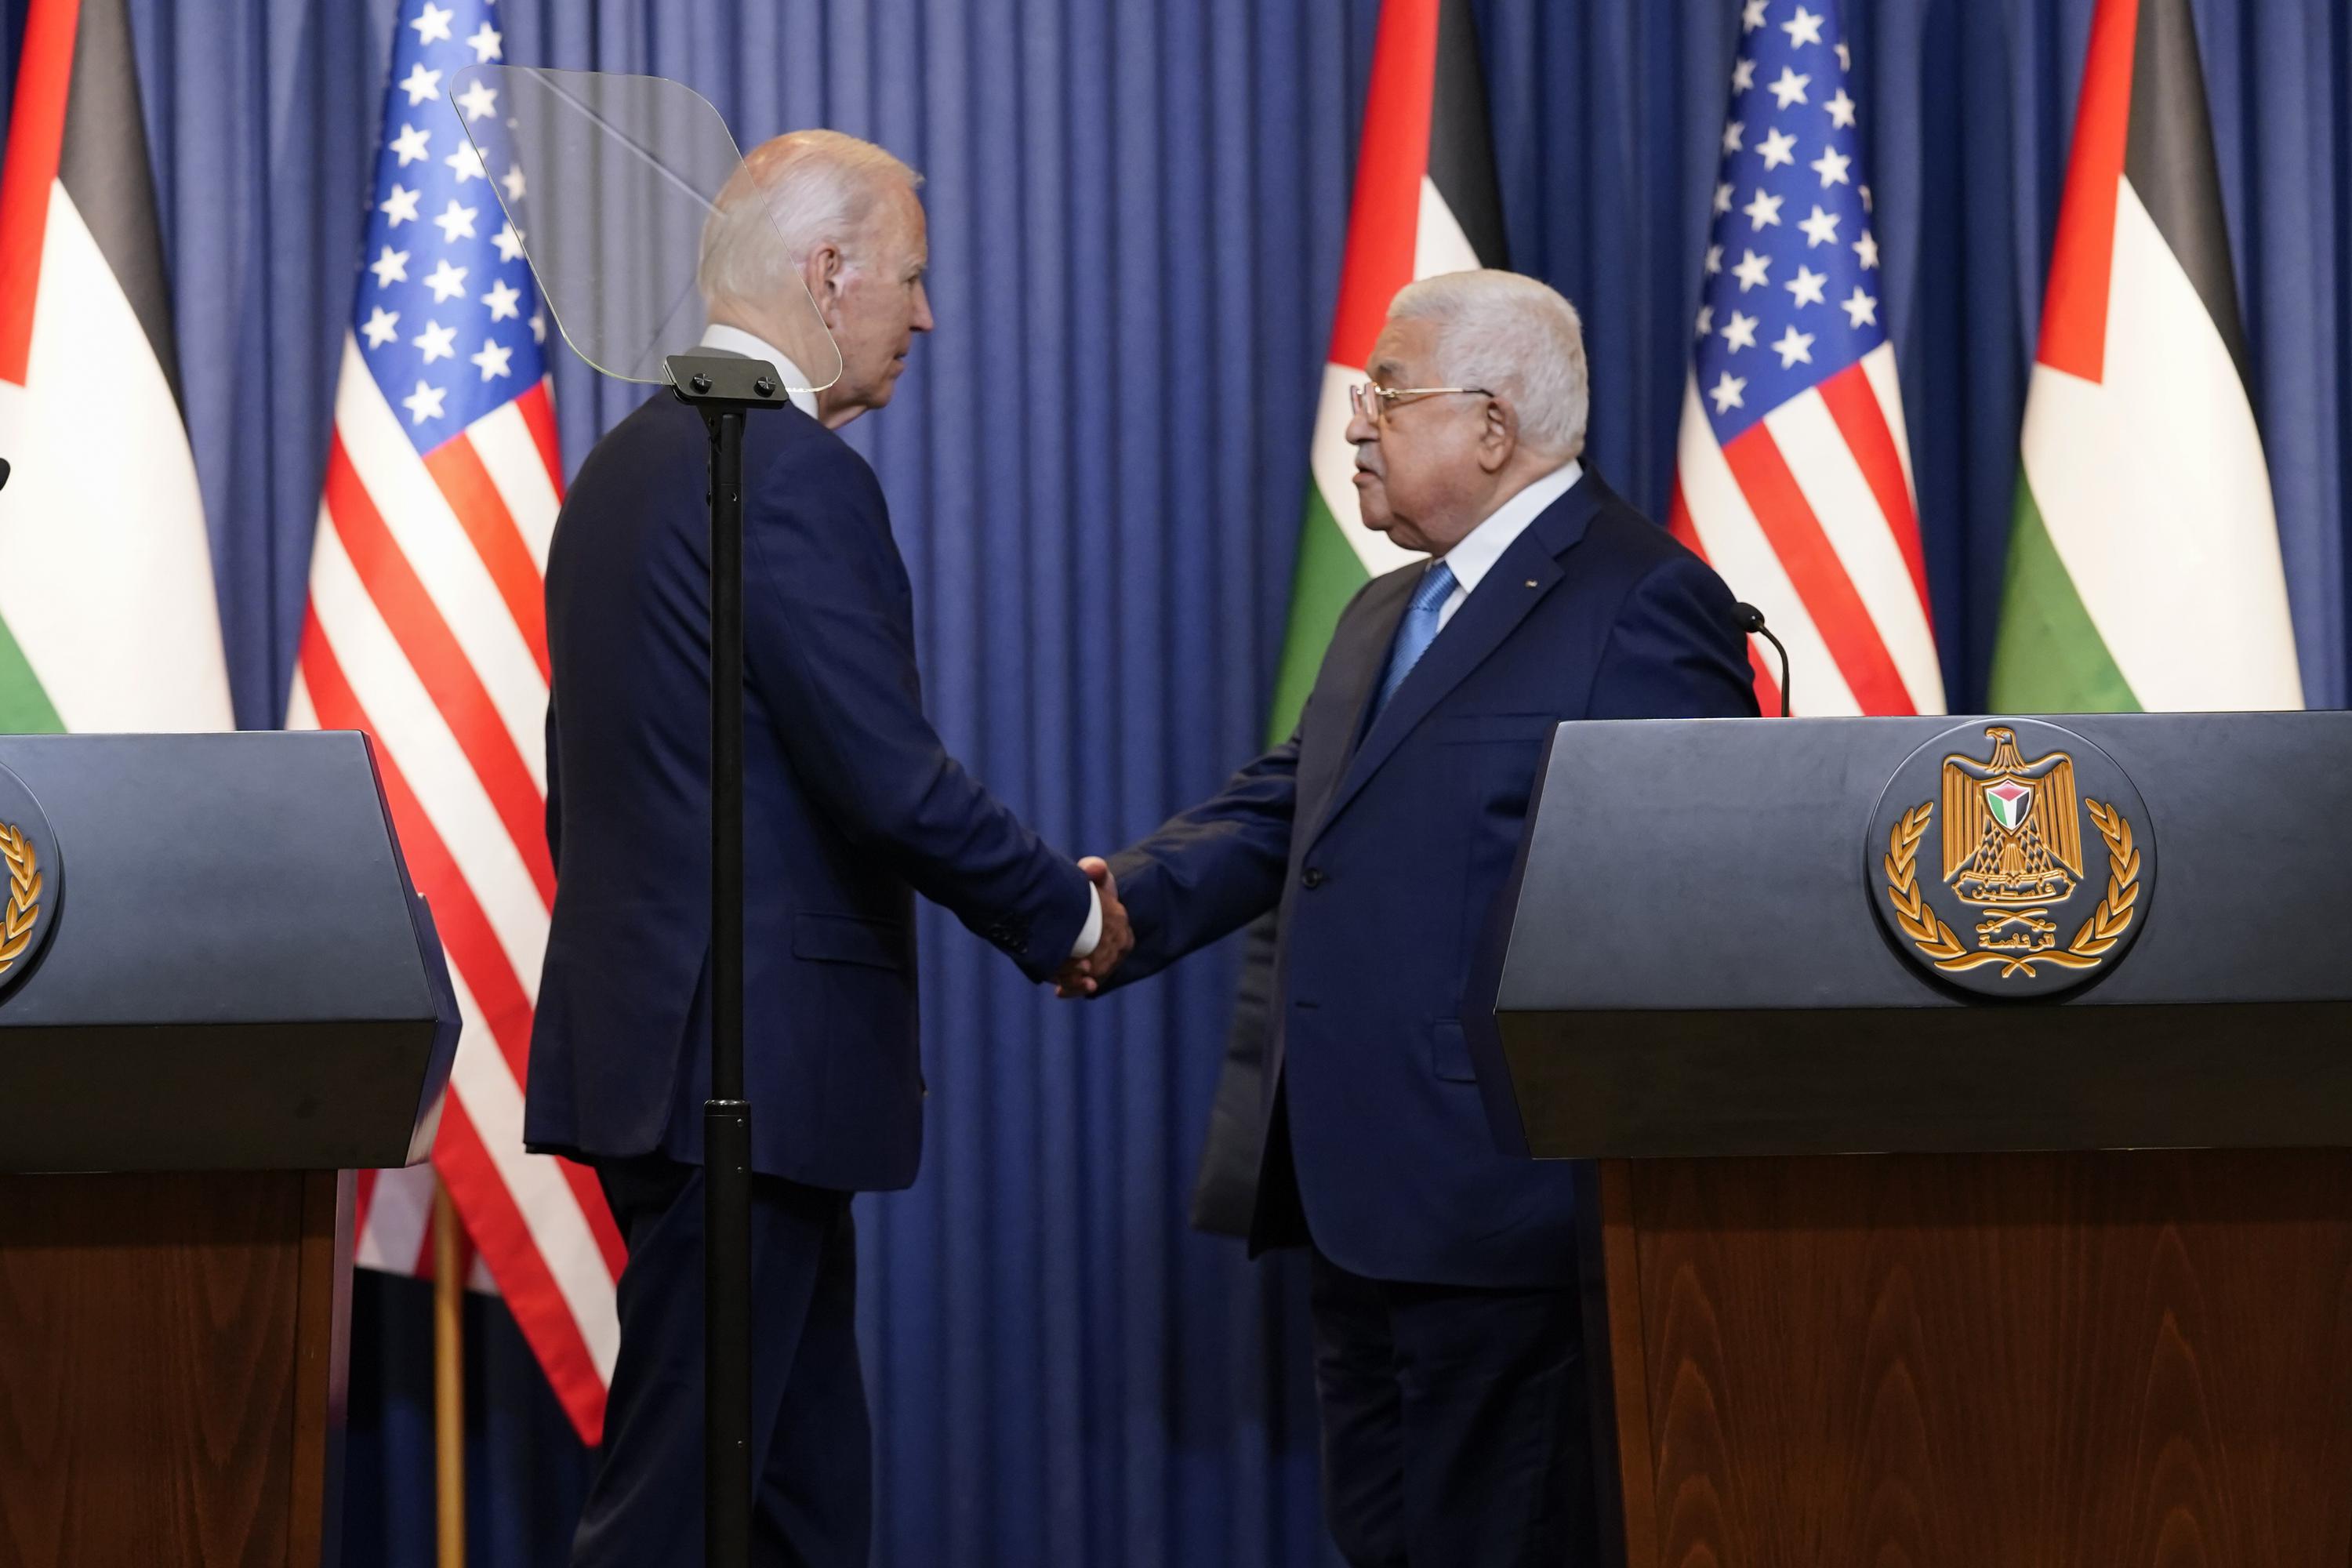 In West Bank, Biden says 'ground is not ripe' for peace